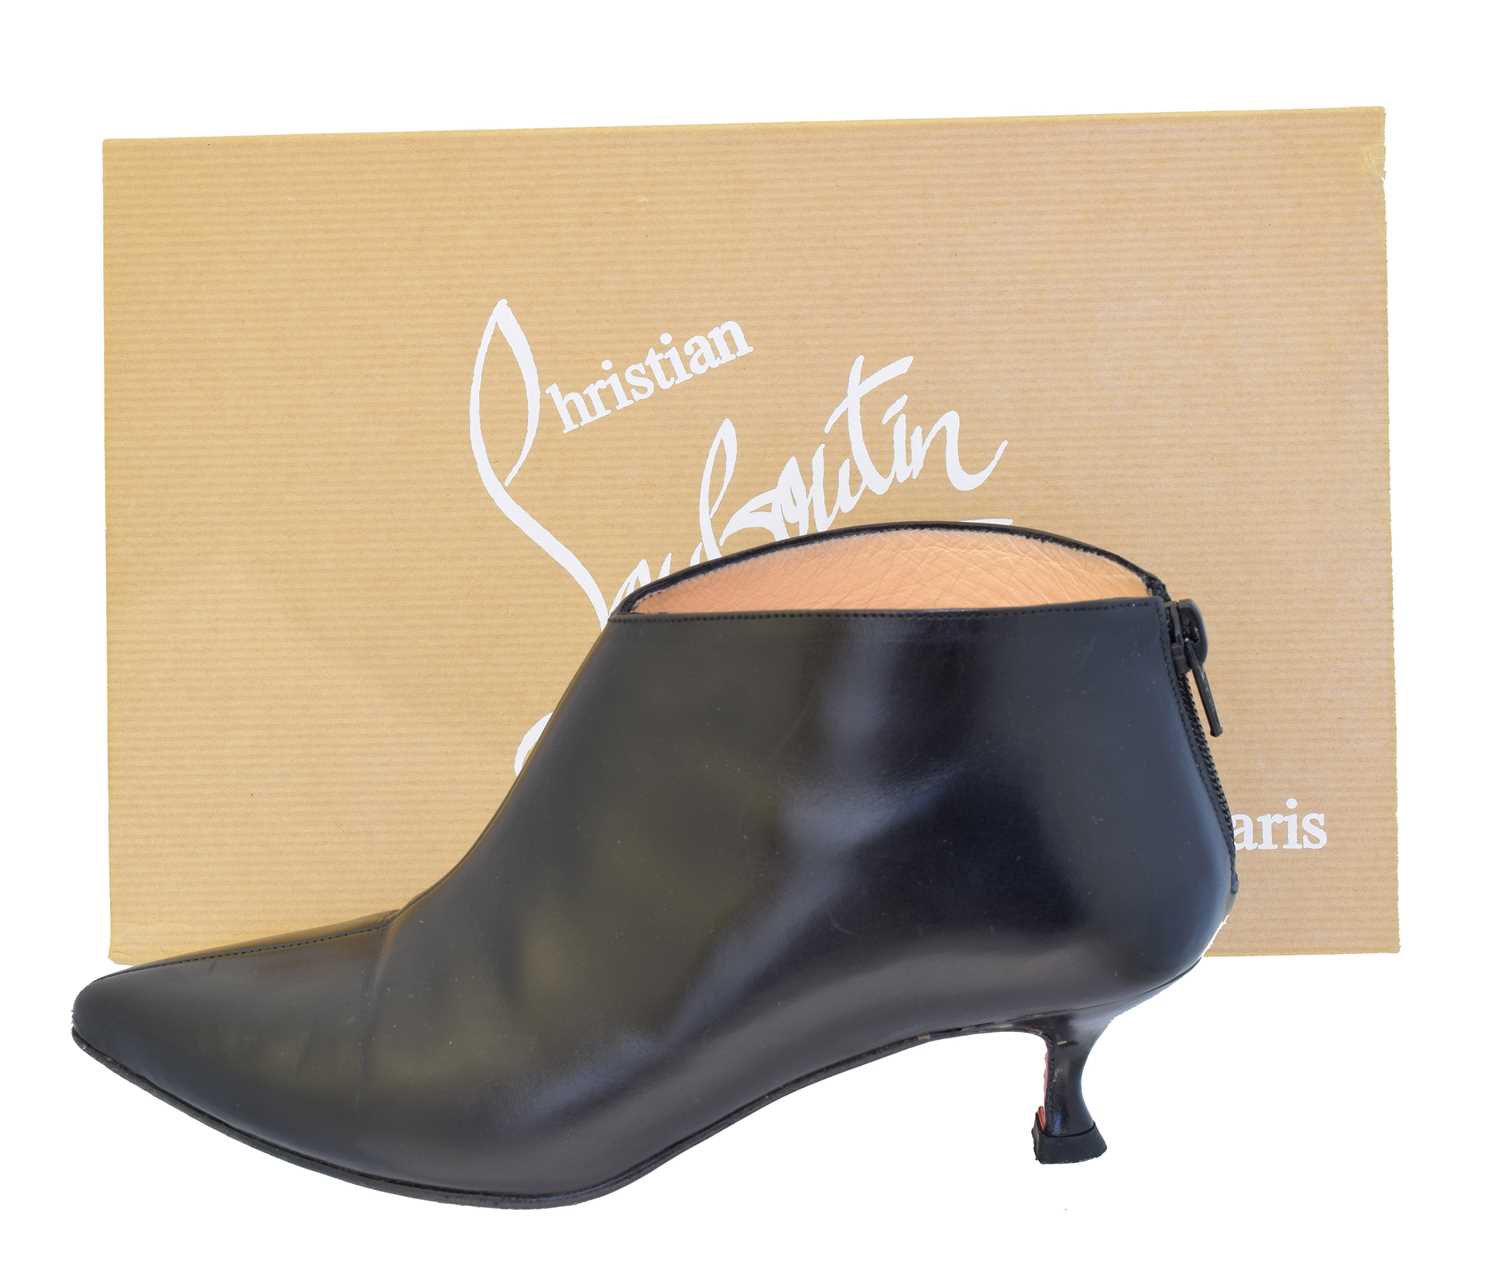 Lot 6 - A pair of Christian Louboutin black leather heeled ankle boots